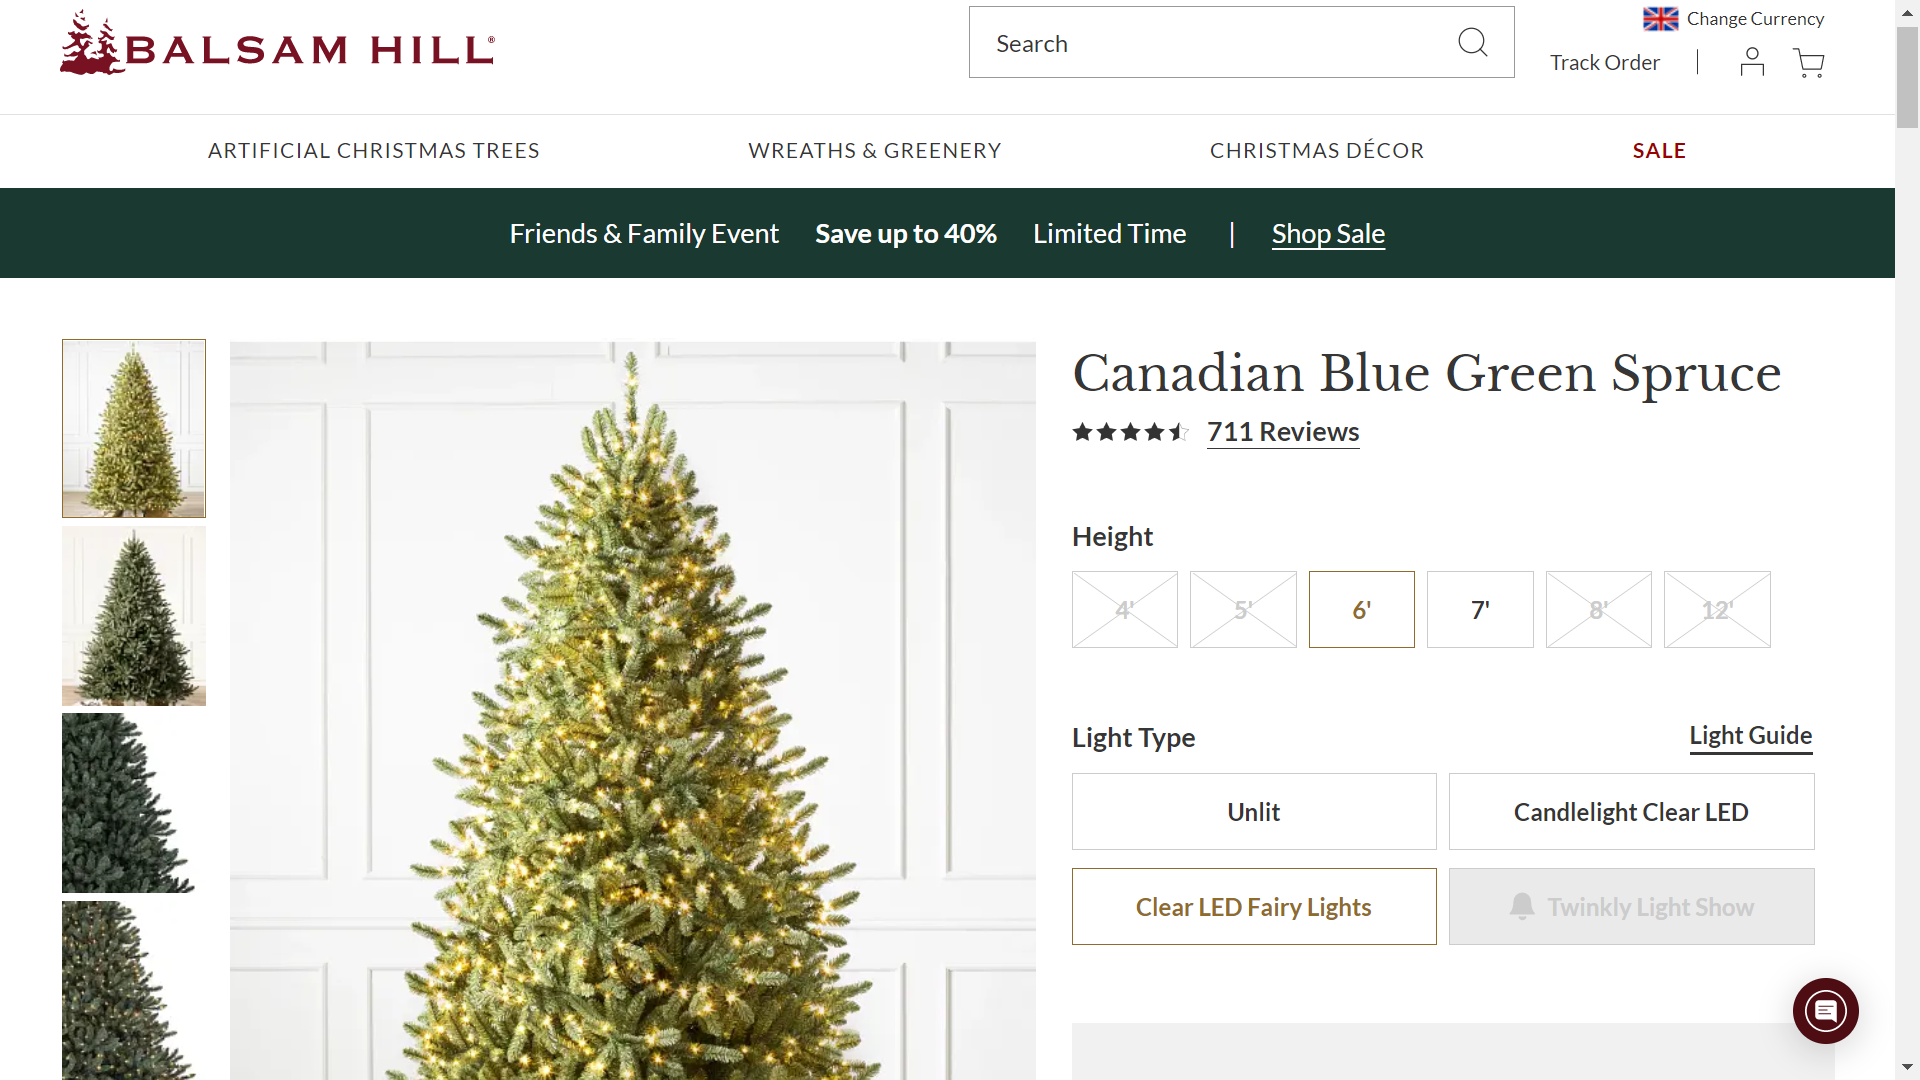 BH (The worlds leading Christmas Tree Brand) Canadian Blue Green Spruce 6' Tree with LED Clear Fairy - Image 2 of 2